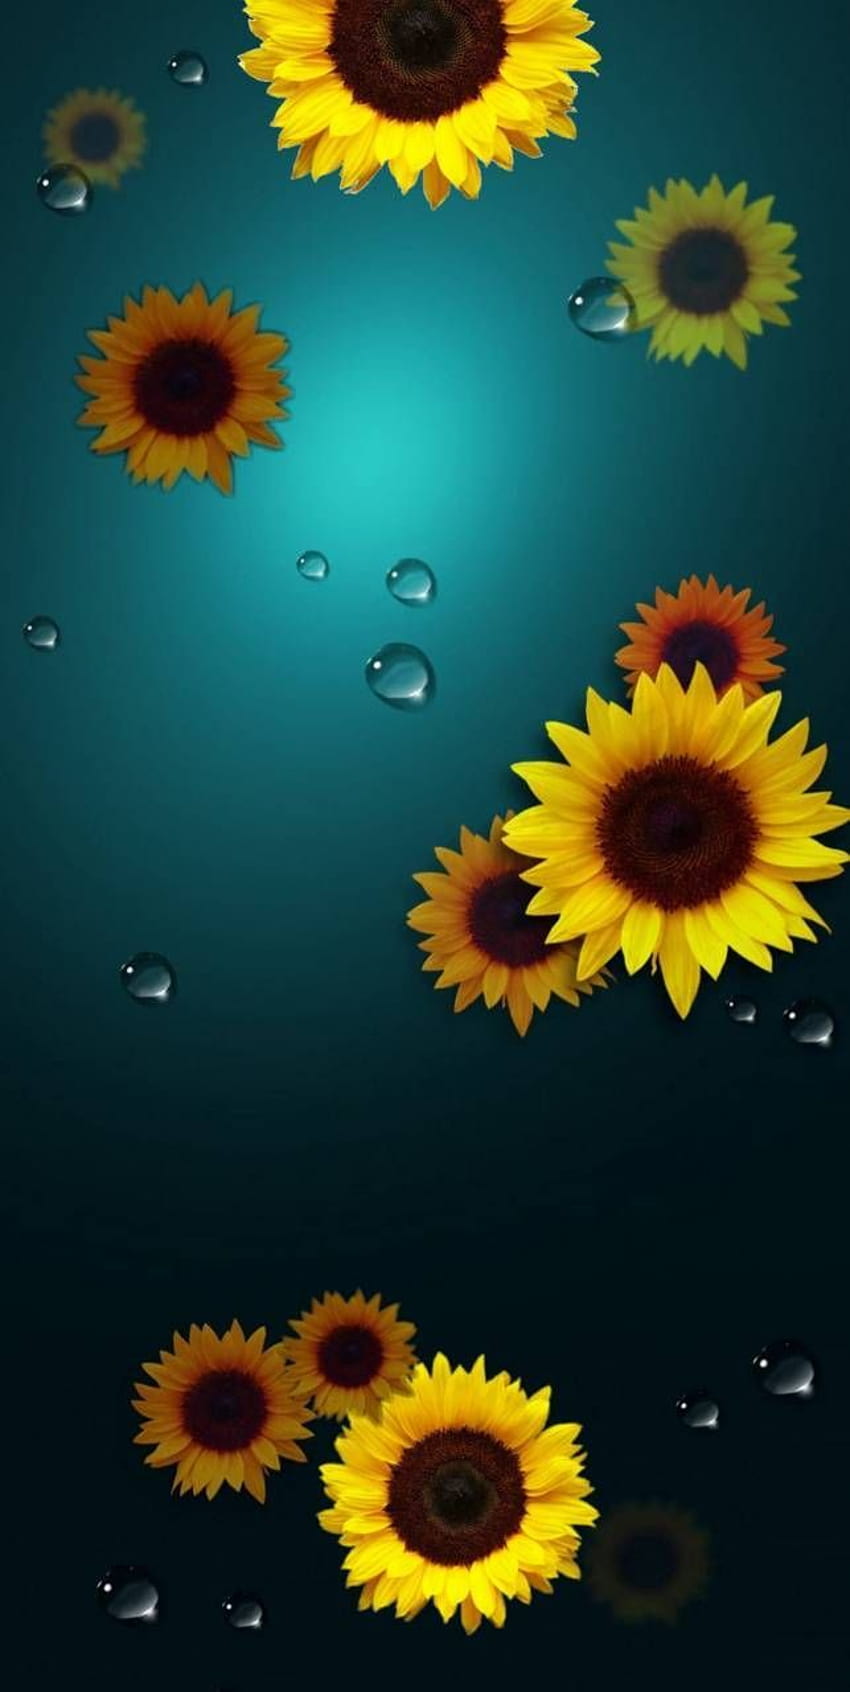 Girasol Pictures  Download Free Images on Unsplash